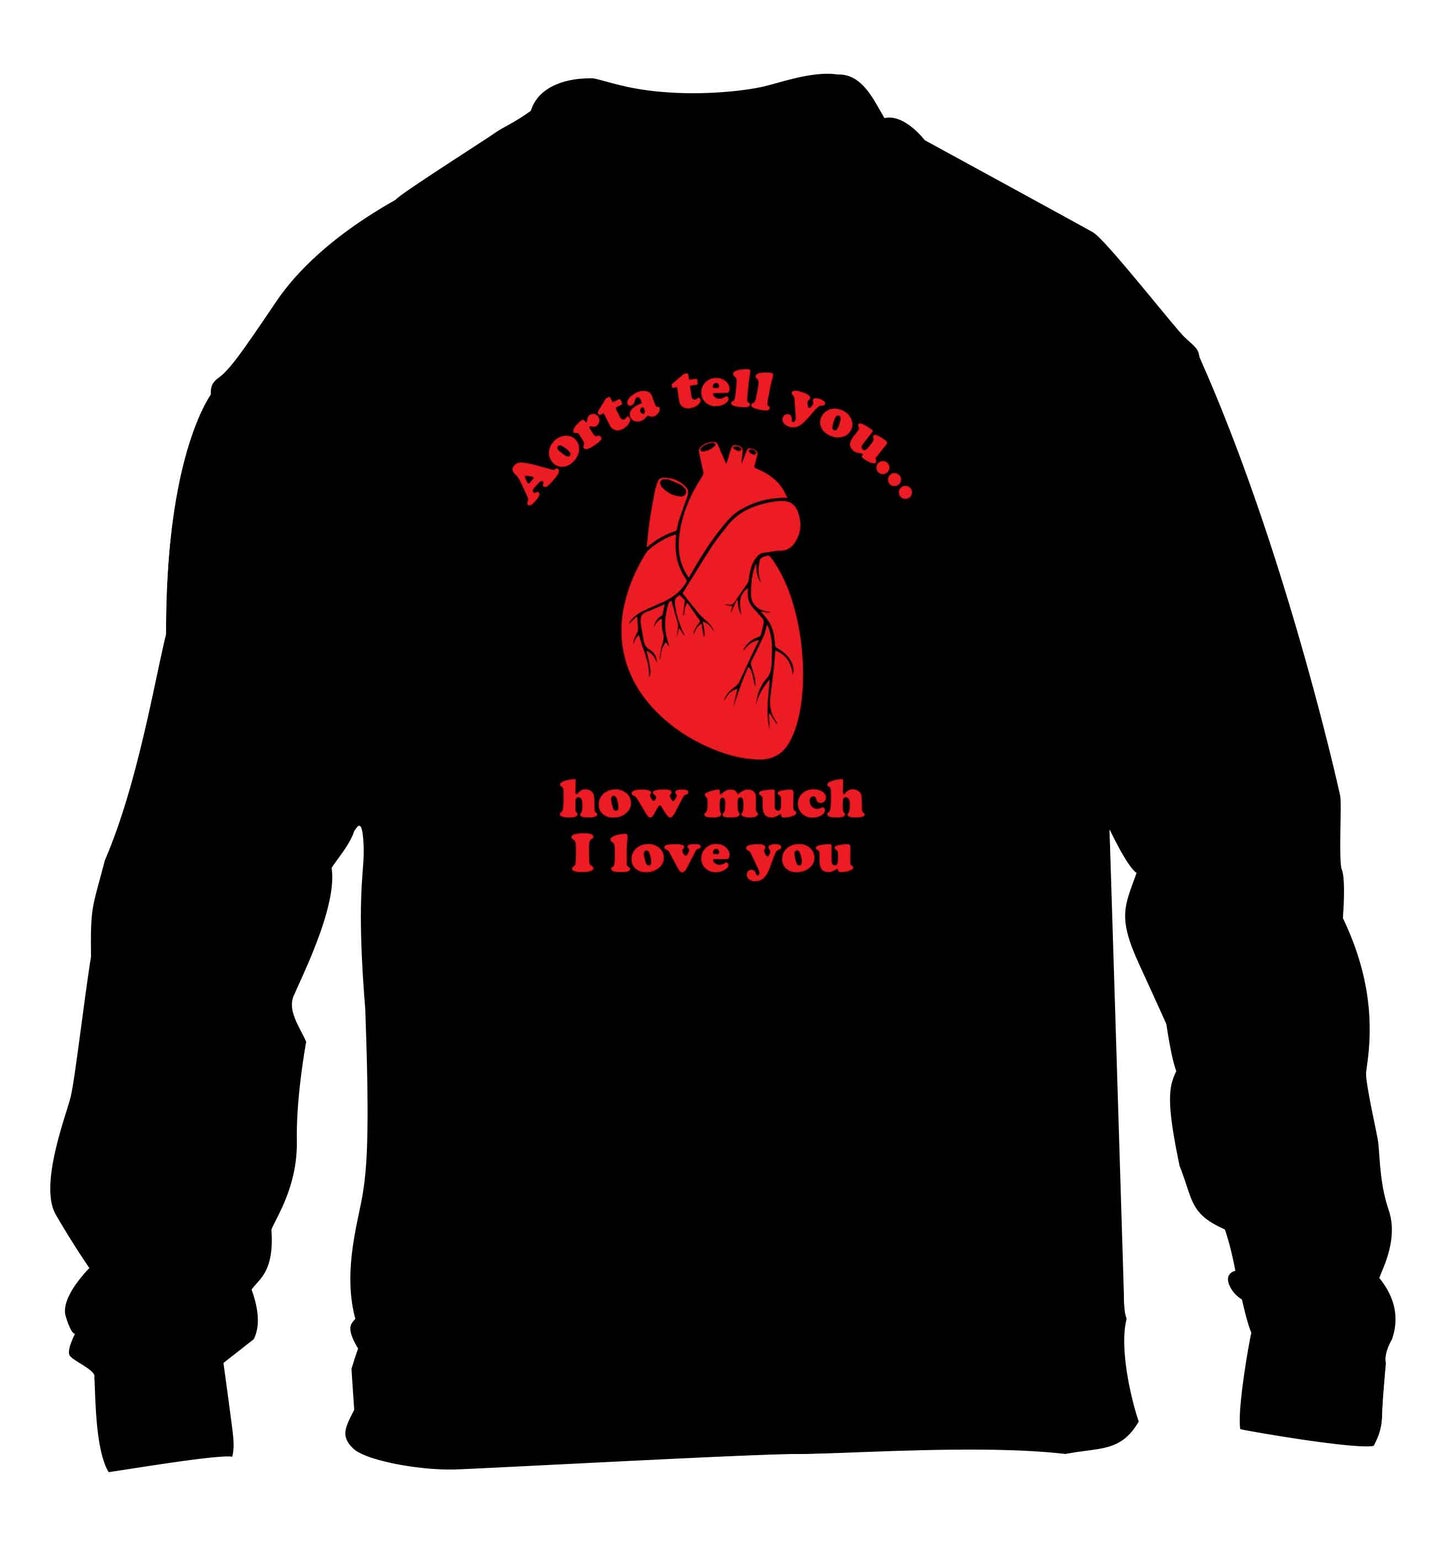 Aorta tell you how much I love you children's black sweater 12-13 Years